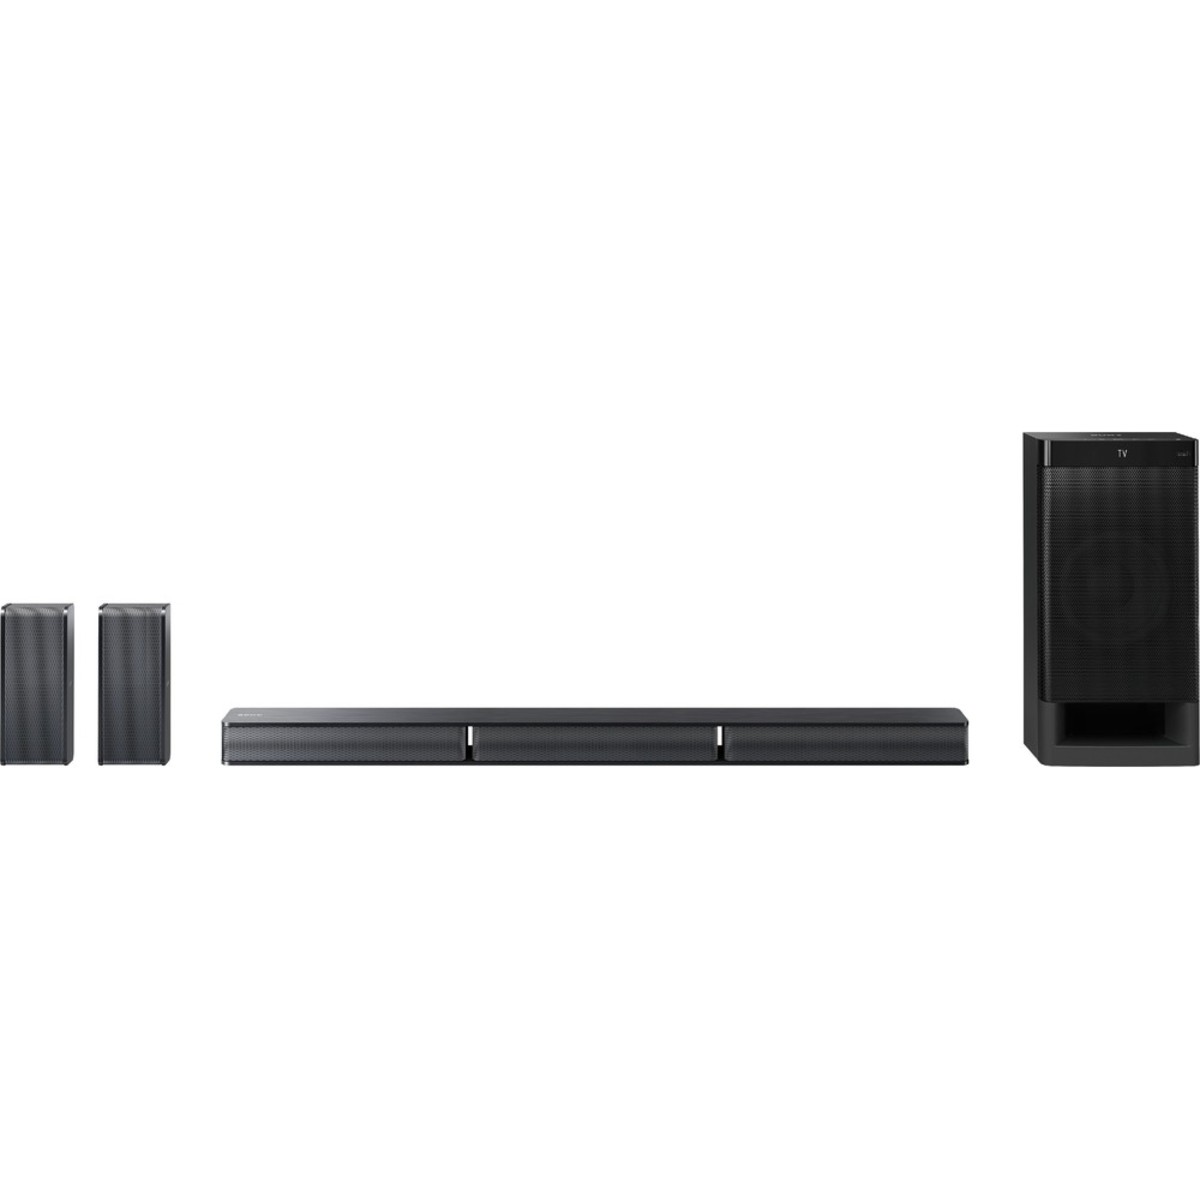 Sony 5.1 Home Theatre HTRT3